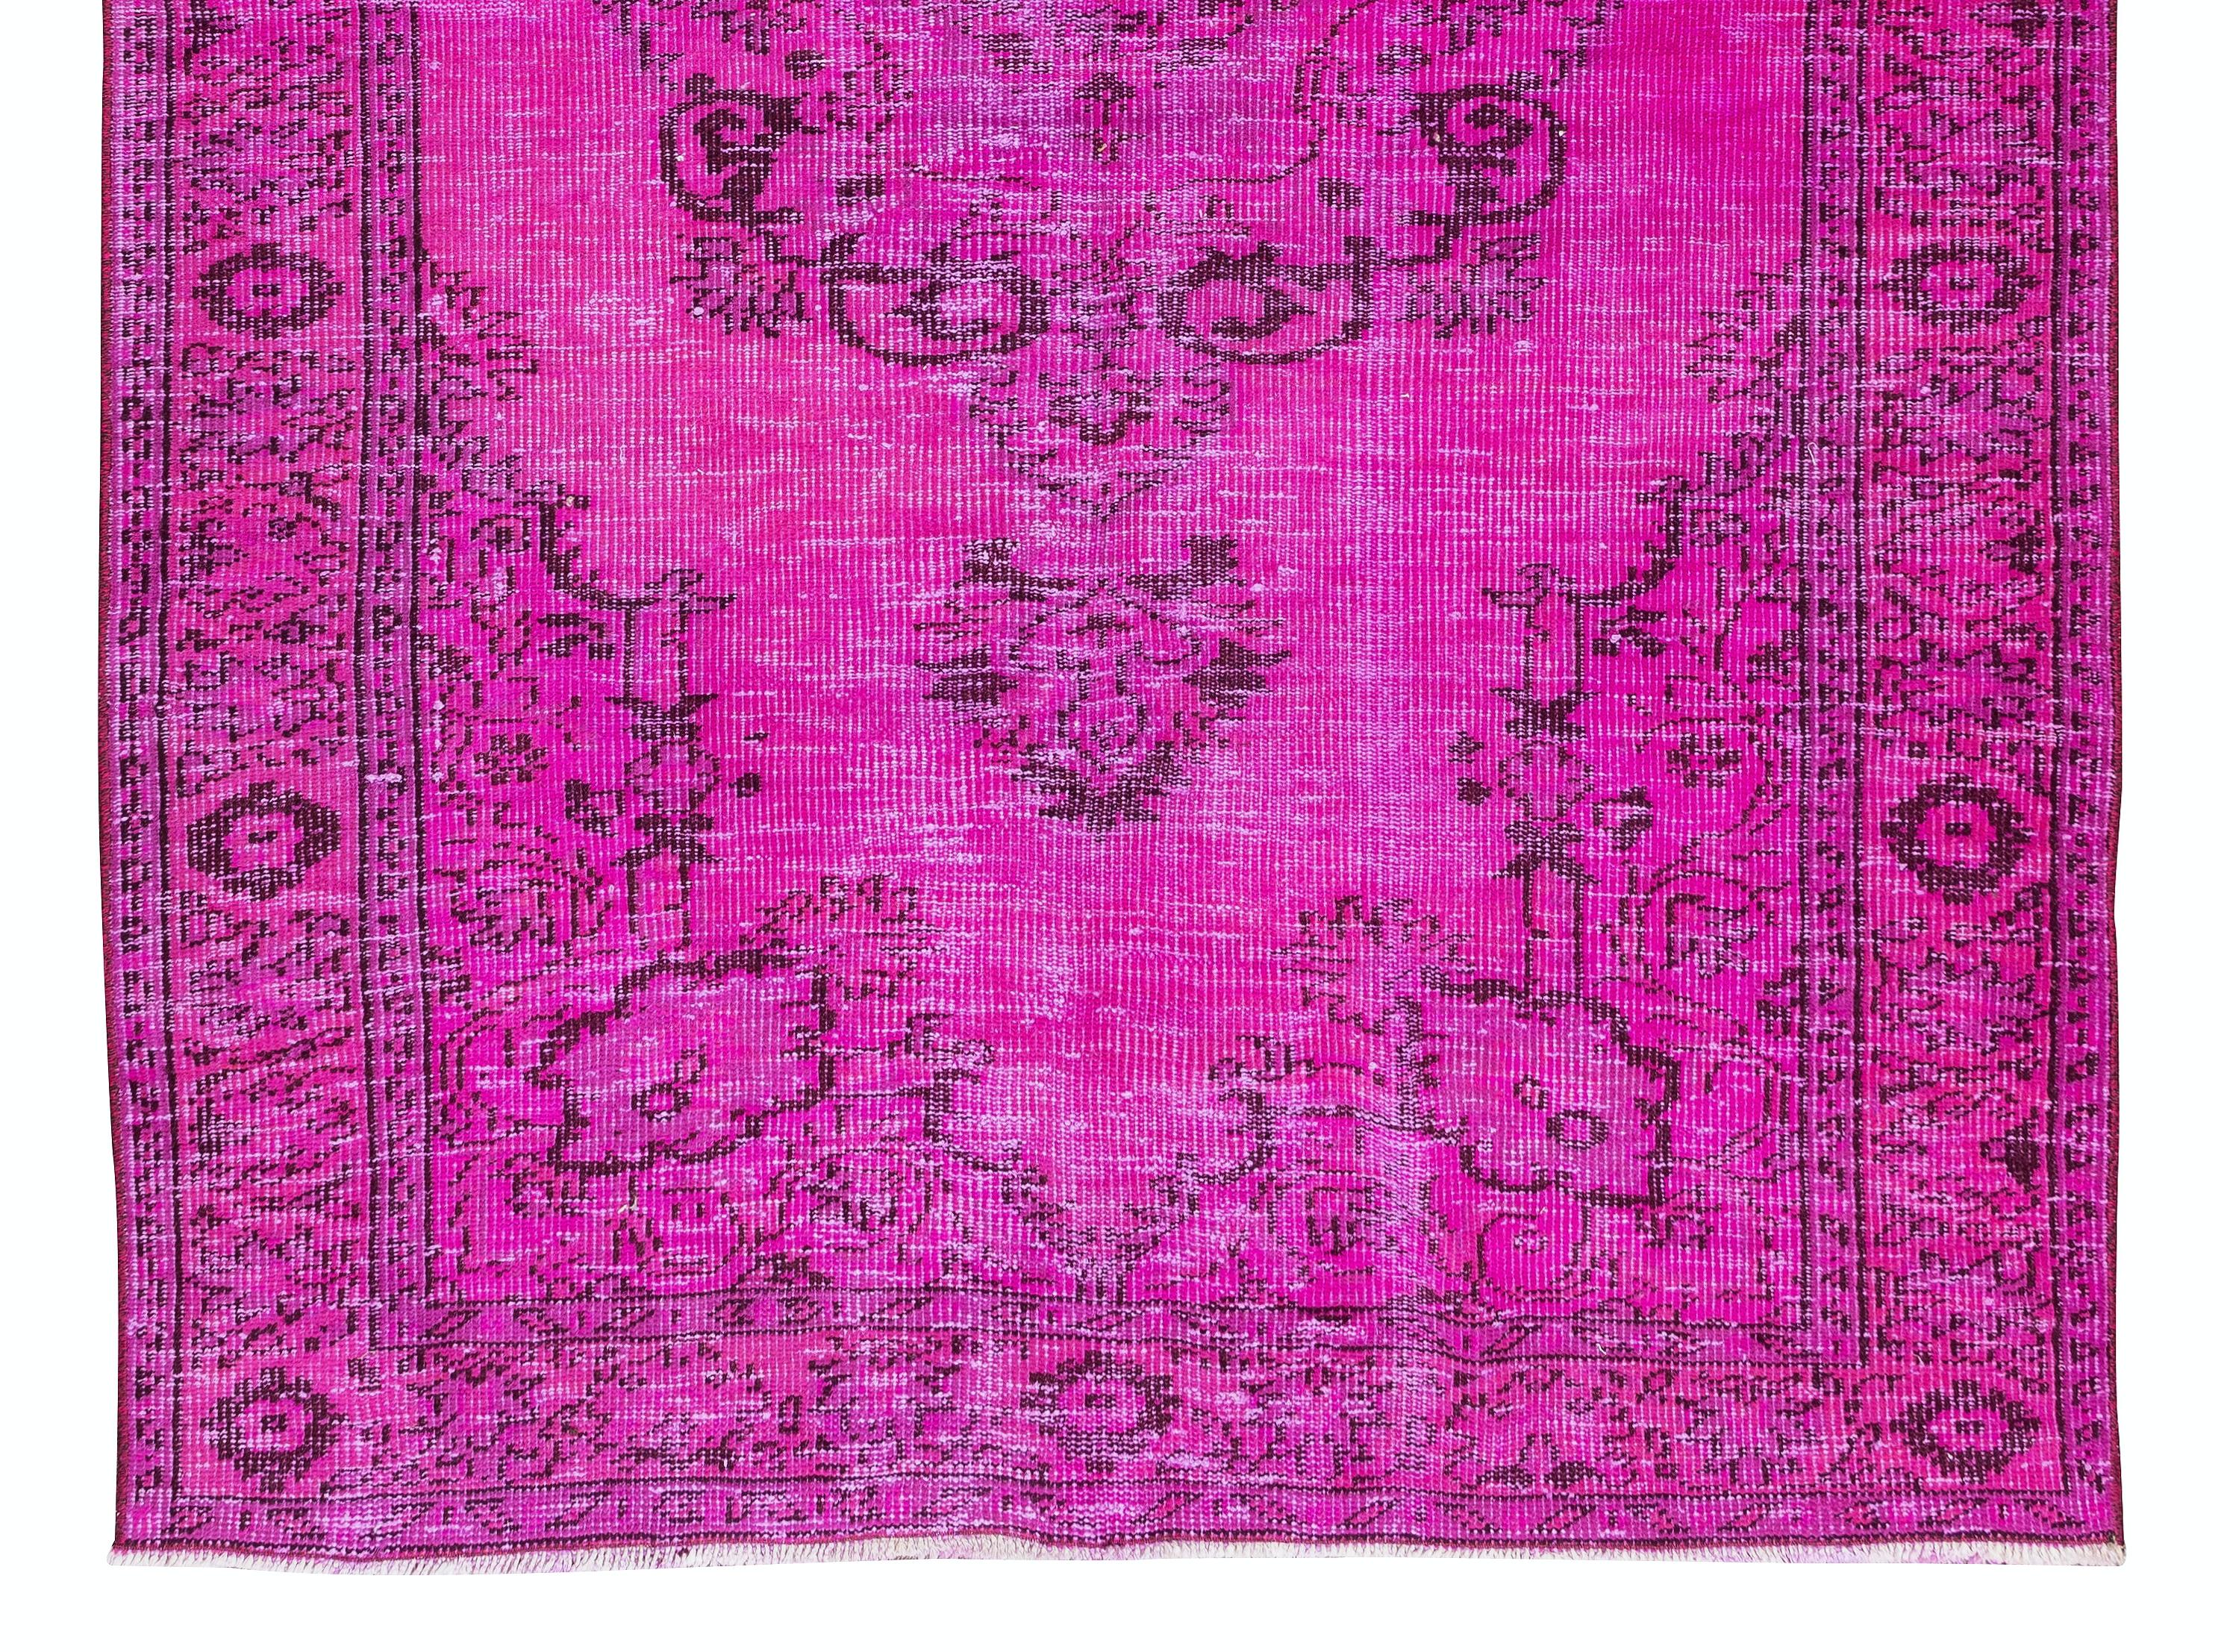 5x7.8 Ft Handmade Turkish Carpet, Fuchsia Pink Area Rug, Woolen Floor Covering In Good Condition For Sale In Philadelphia, PA